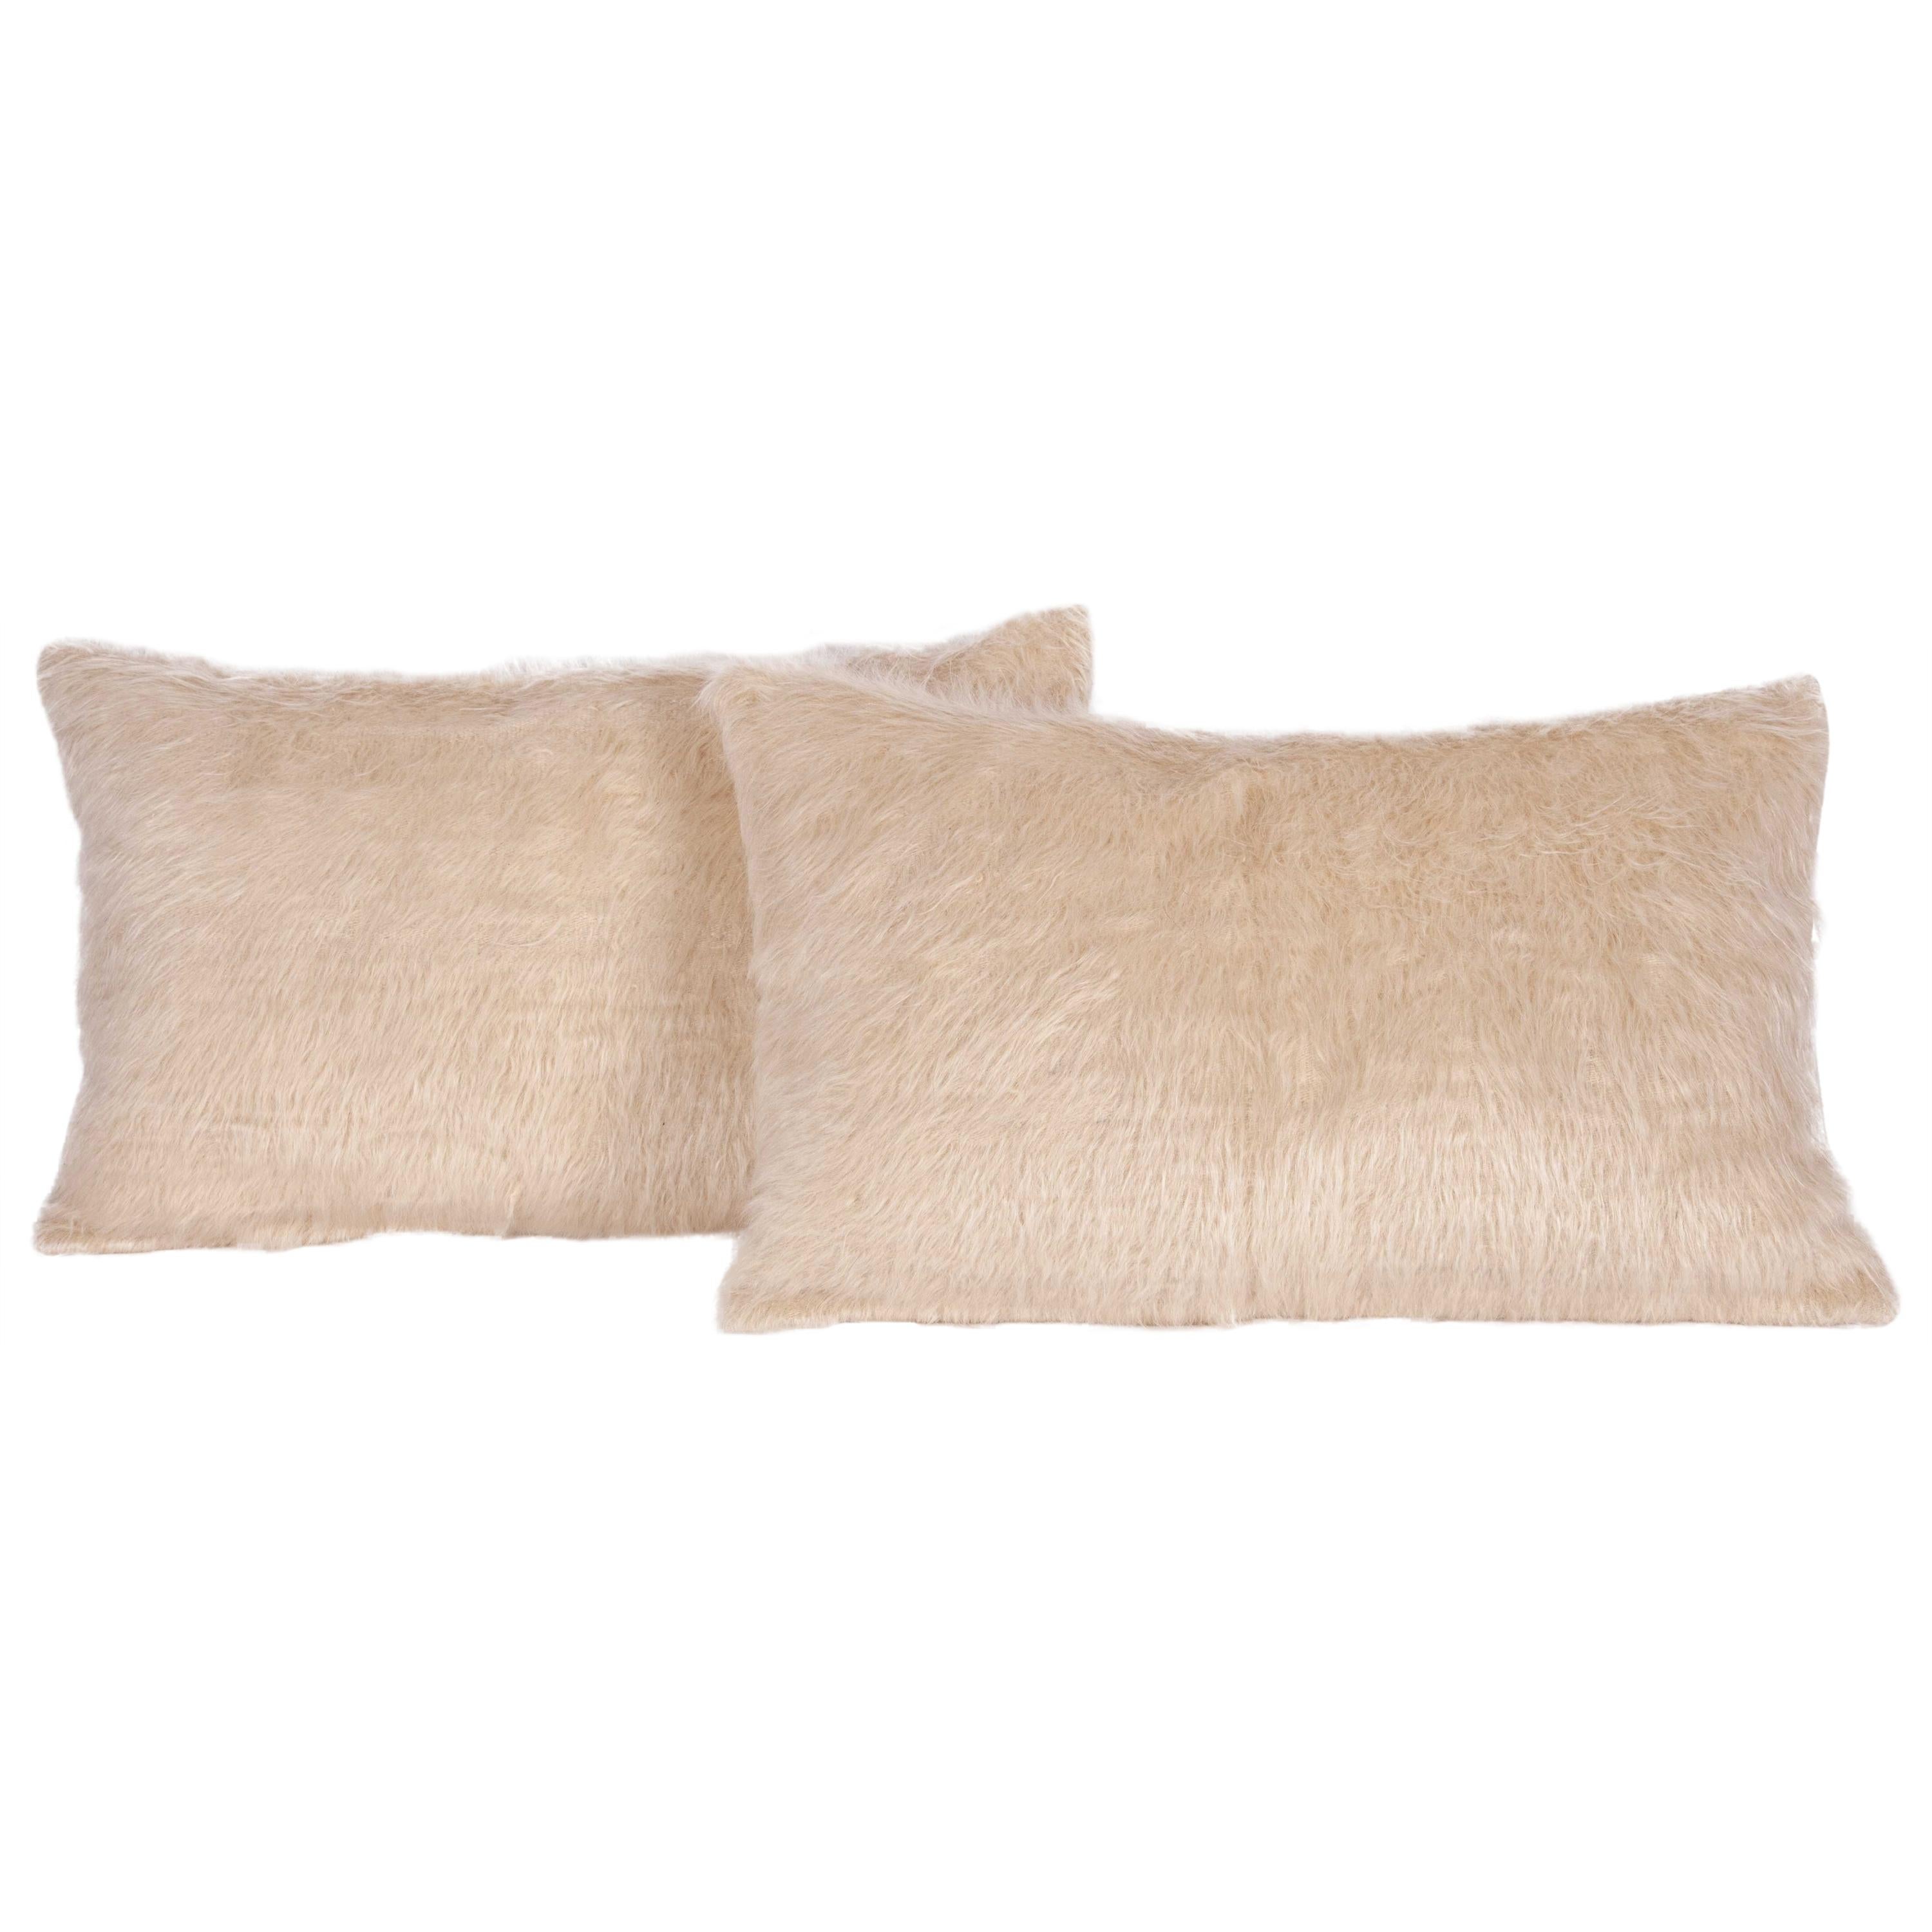 Pillow Cases Fashioned from a Mid-20th Century Anatolian Angora Siirt Blanket